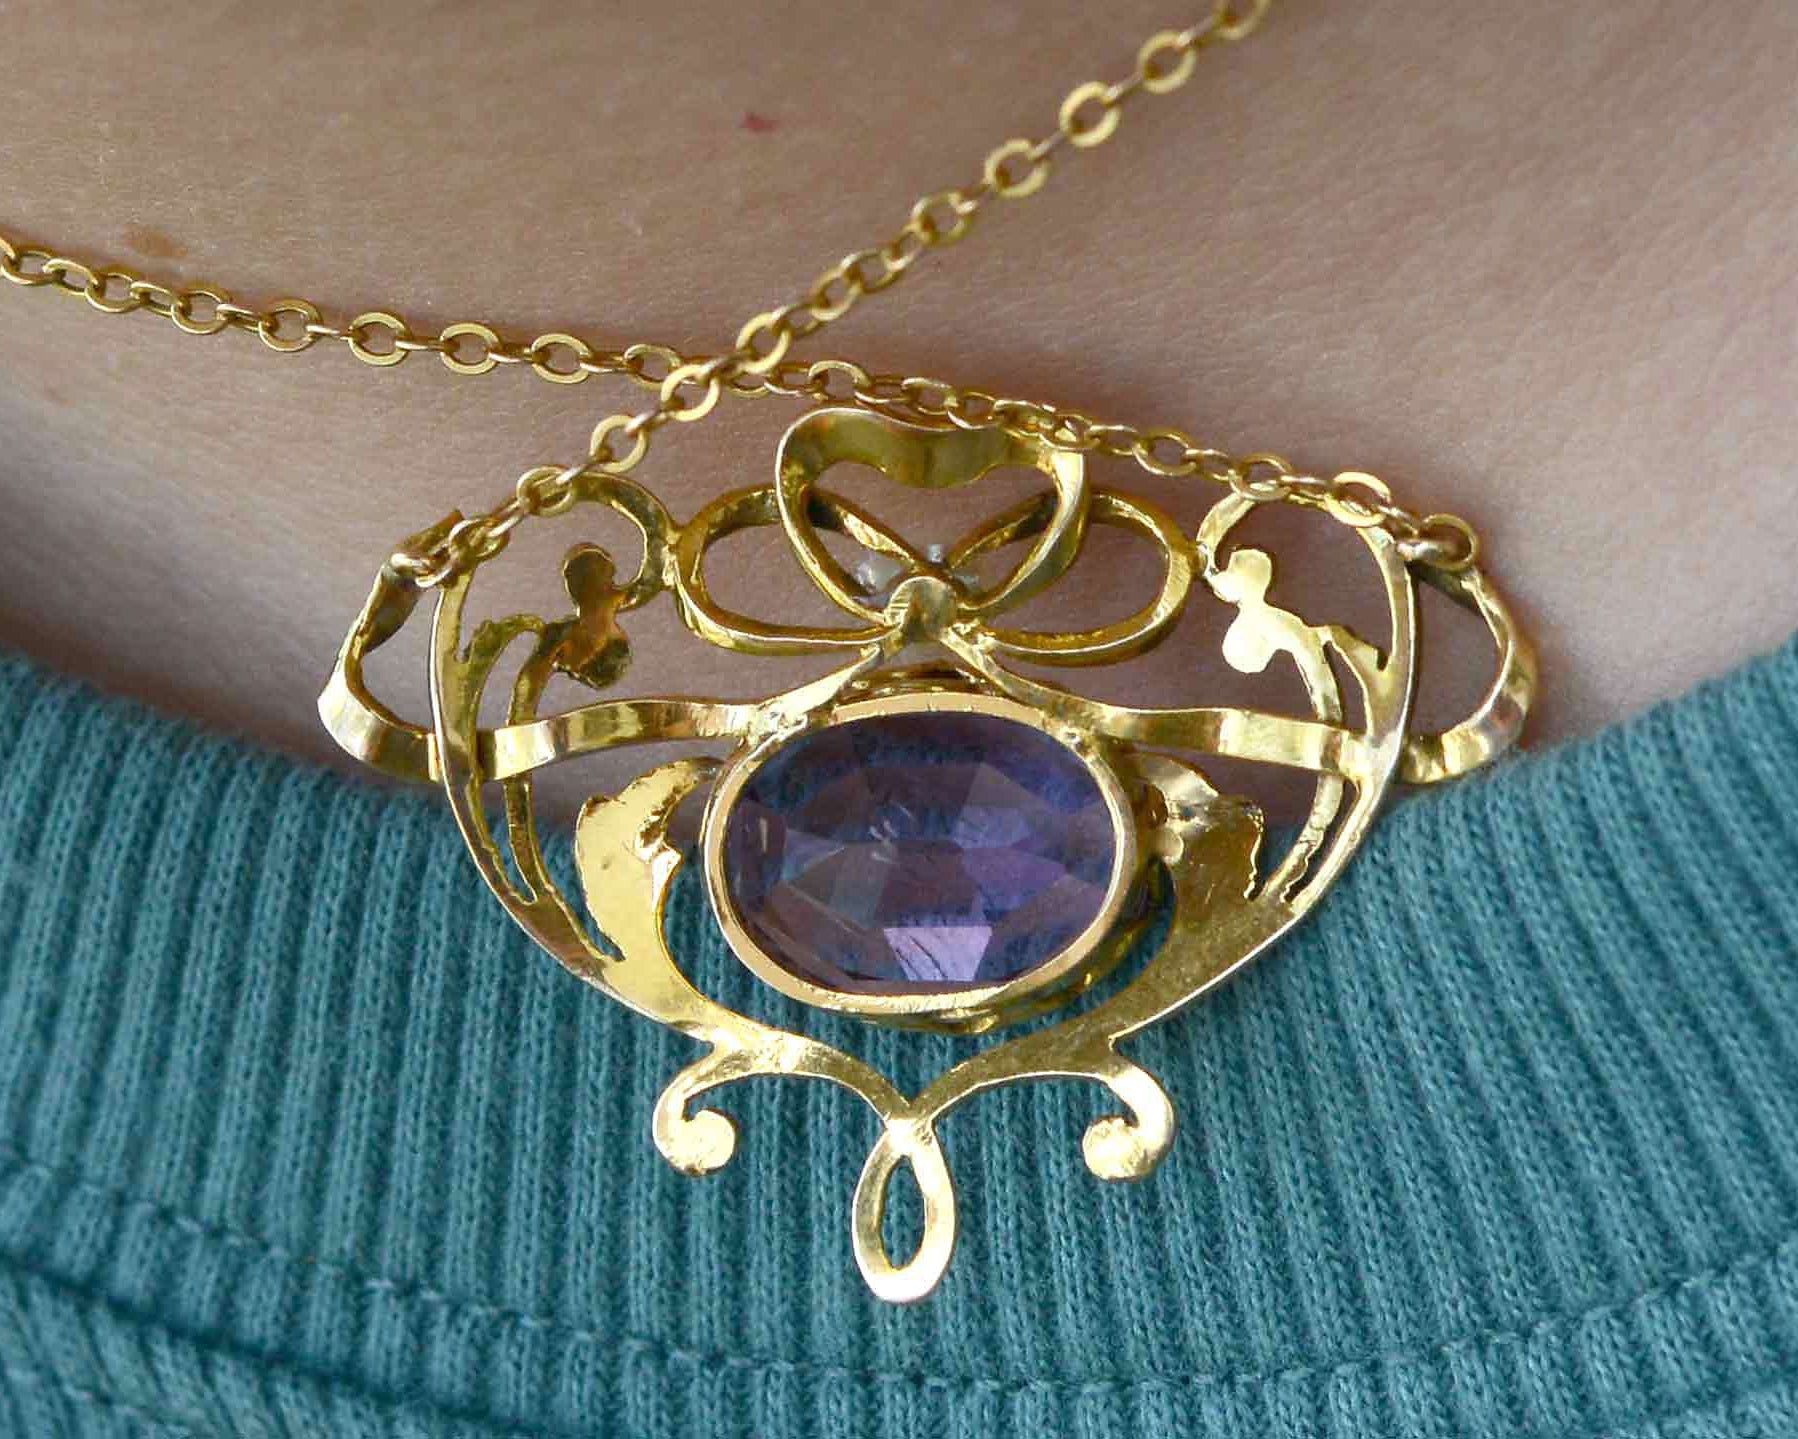 With scrolling, flowing vines, this is an authentic antique Art Nouveau amethyst necklace.